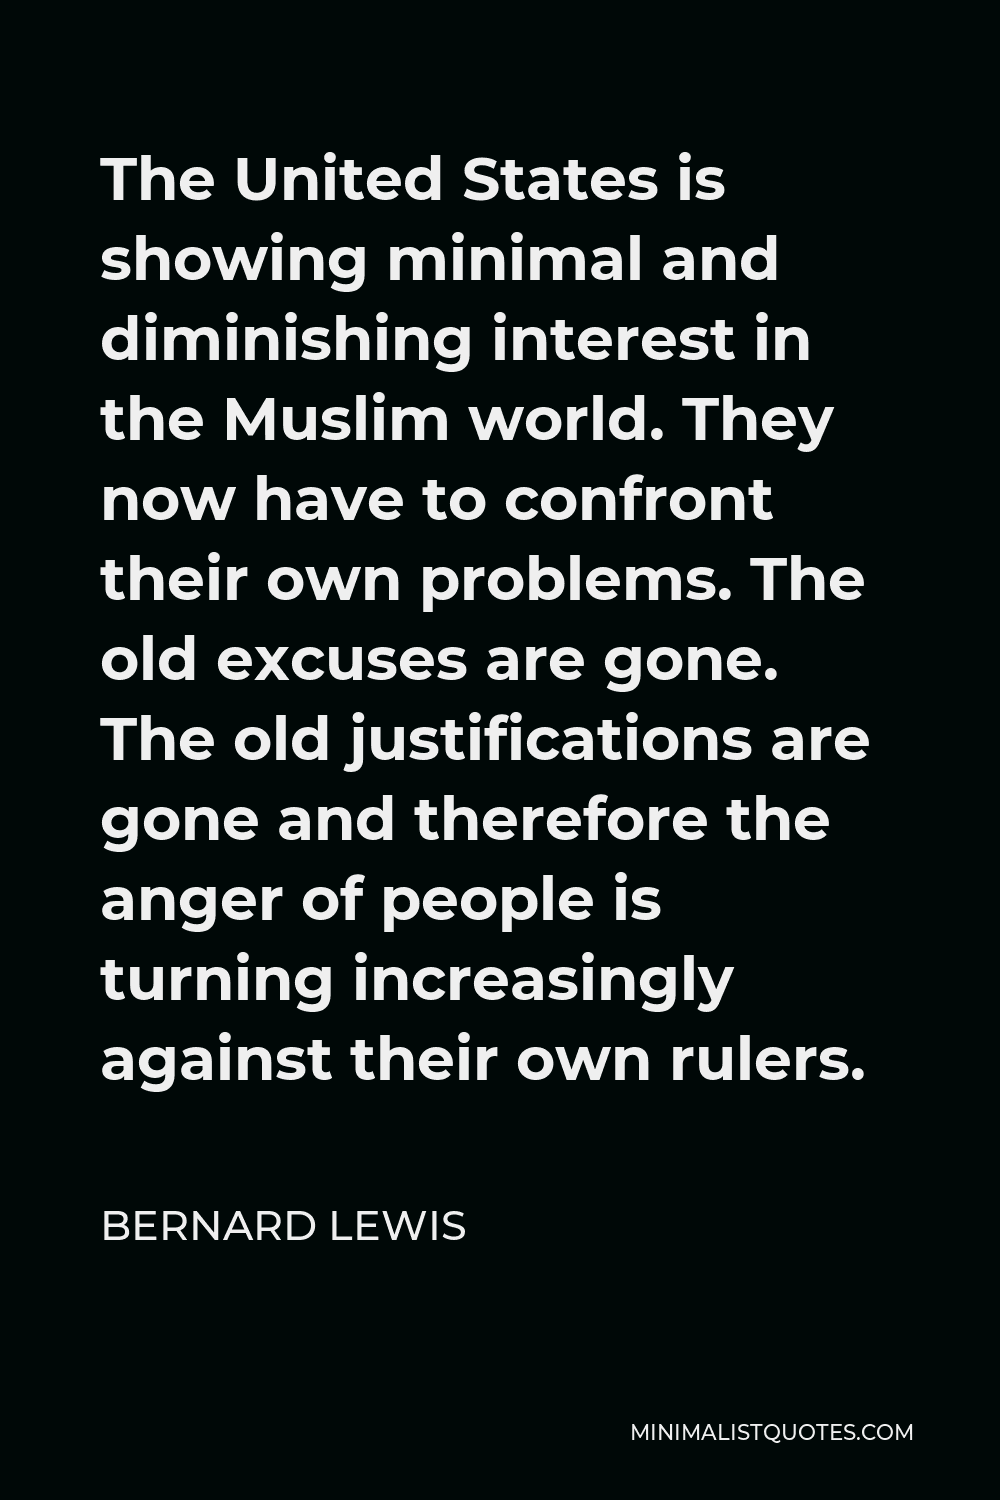 Bernard Lewis Quote - The United States is showing minimal and diminishing interest in the Muslim world. They now have to confront their own problems. The old excuses are gone. The old justifications are gone and therefore the anger of people is turning increasingly against their own rulers.